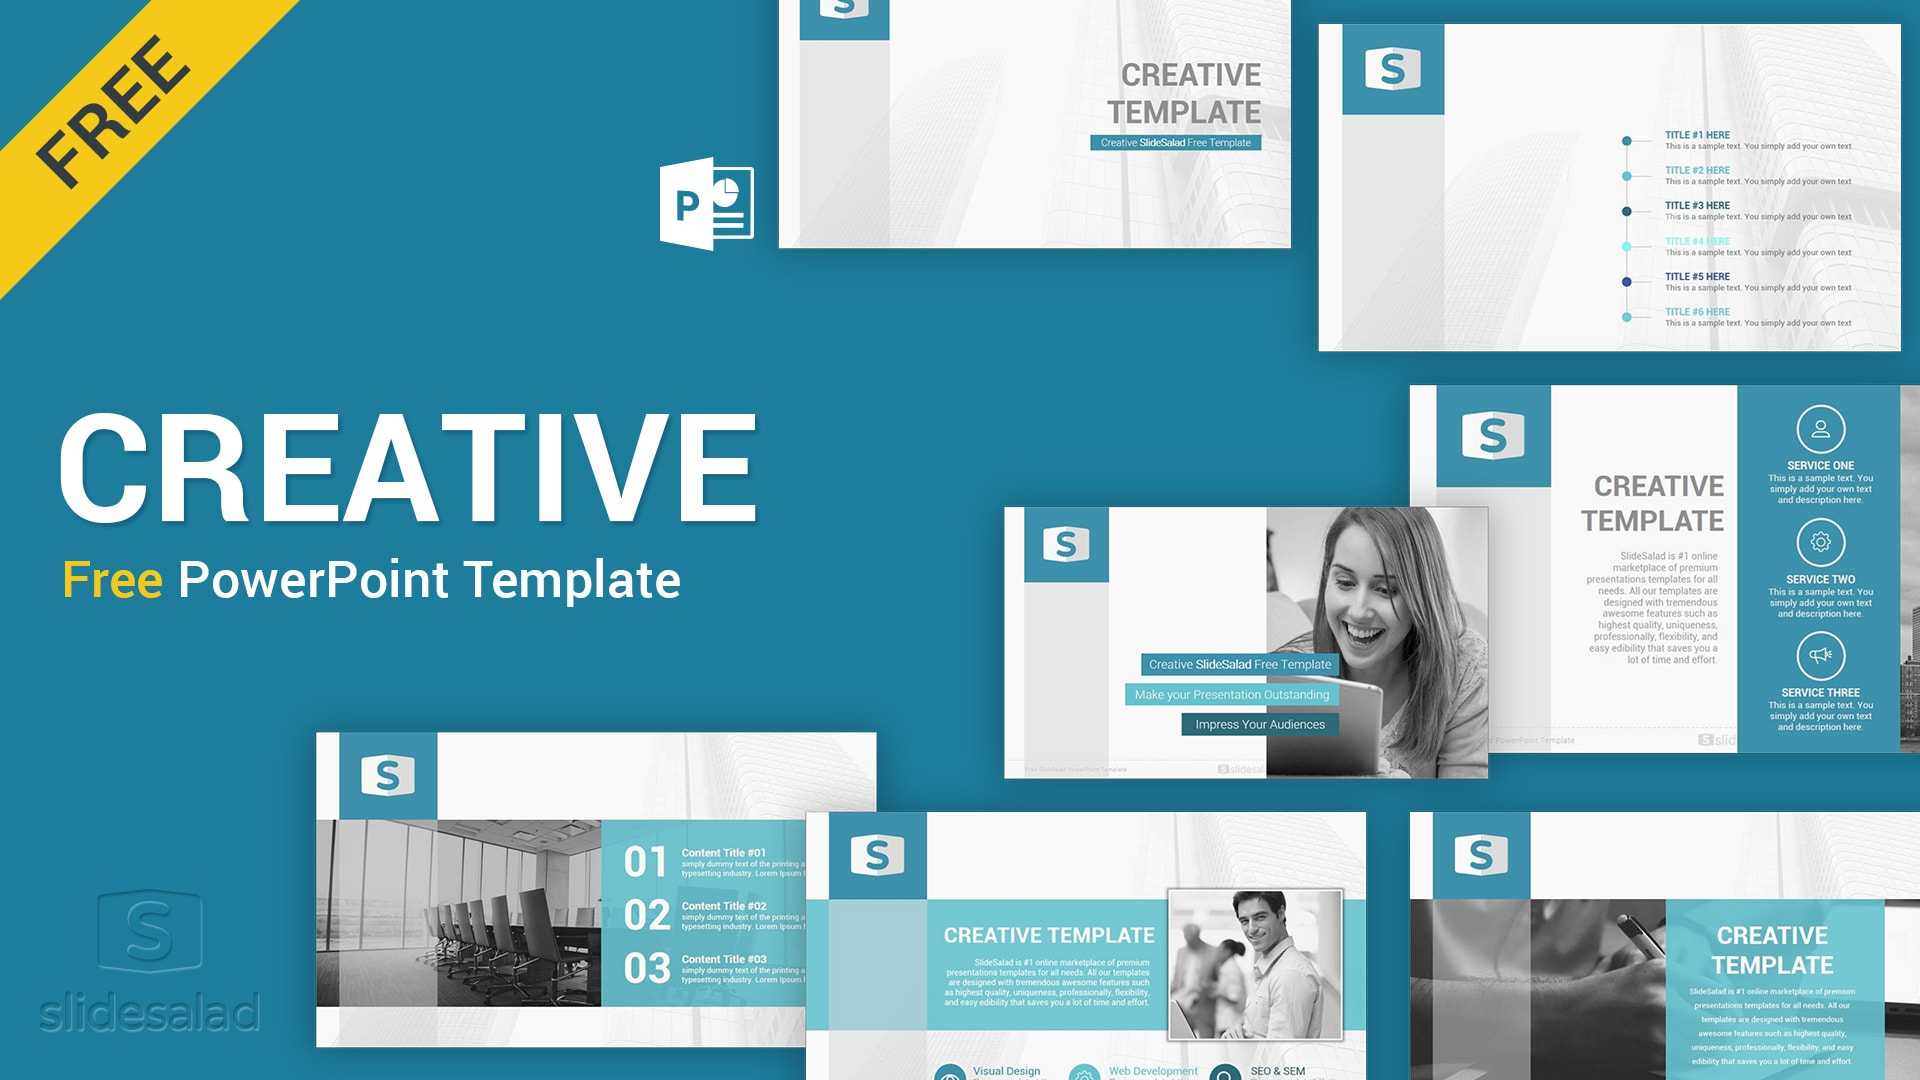 Creative Free Download Powerpoint Template – Slidesalad With Regard To Free Powerpoint Presentation Templates Downloads